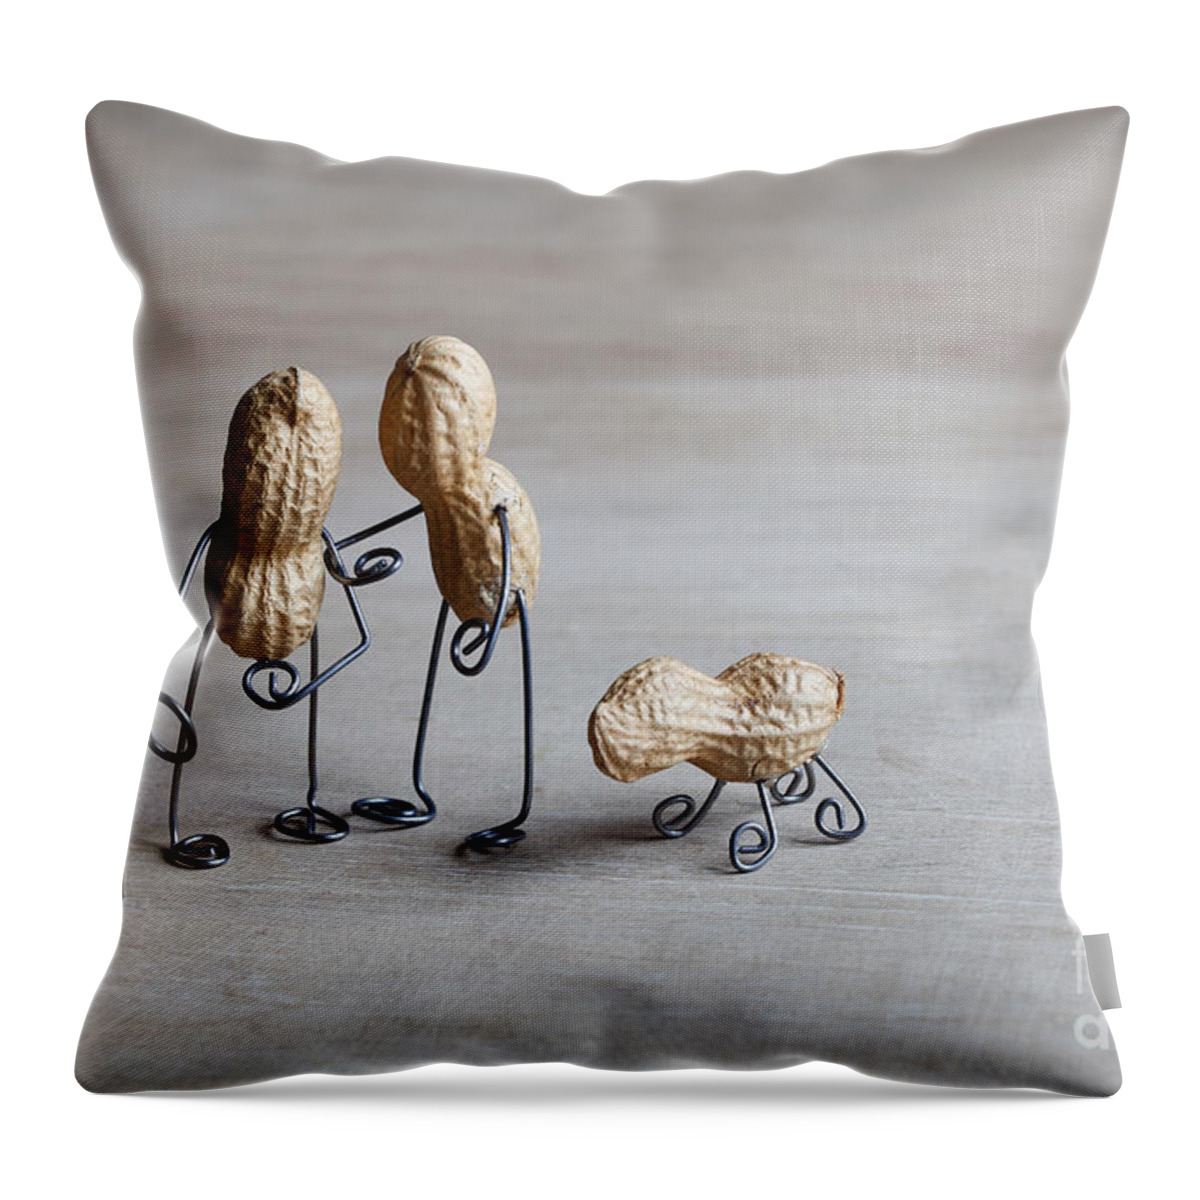 Peanut Throw Pillow featuring the photograph Together 02 by Nailia Schwarz